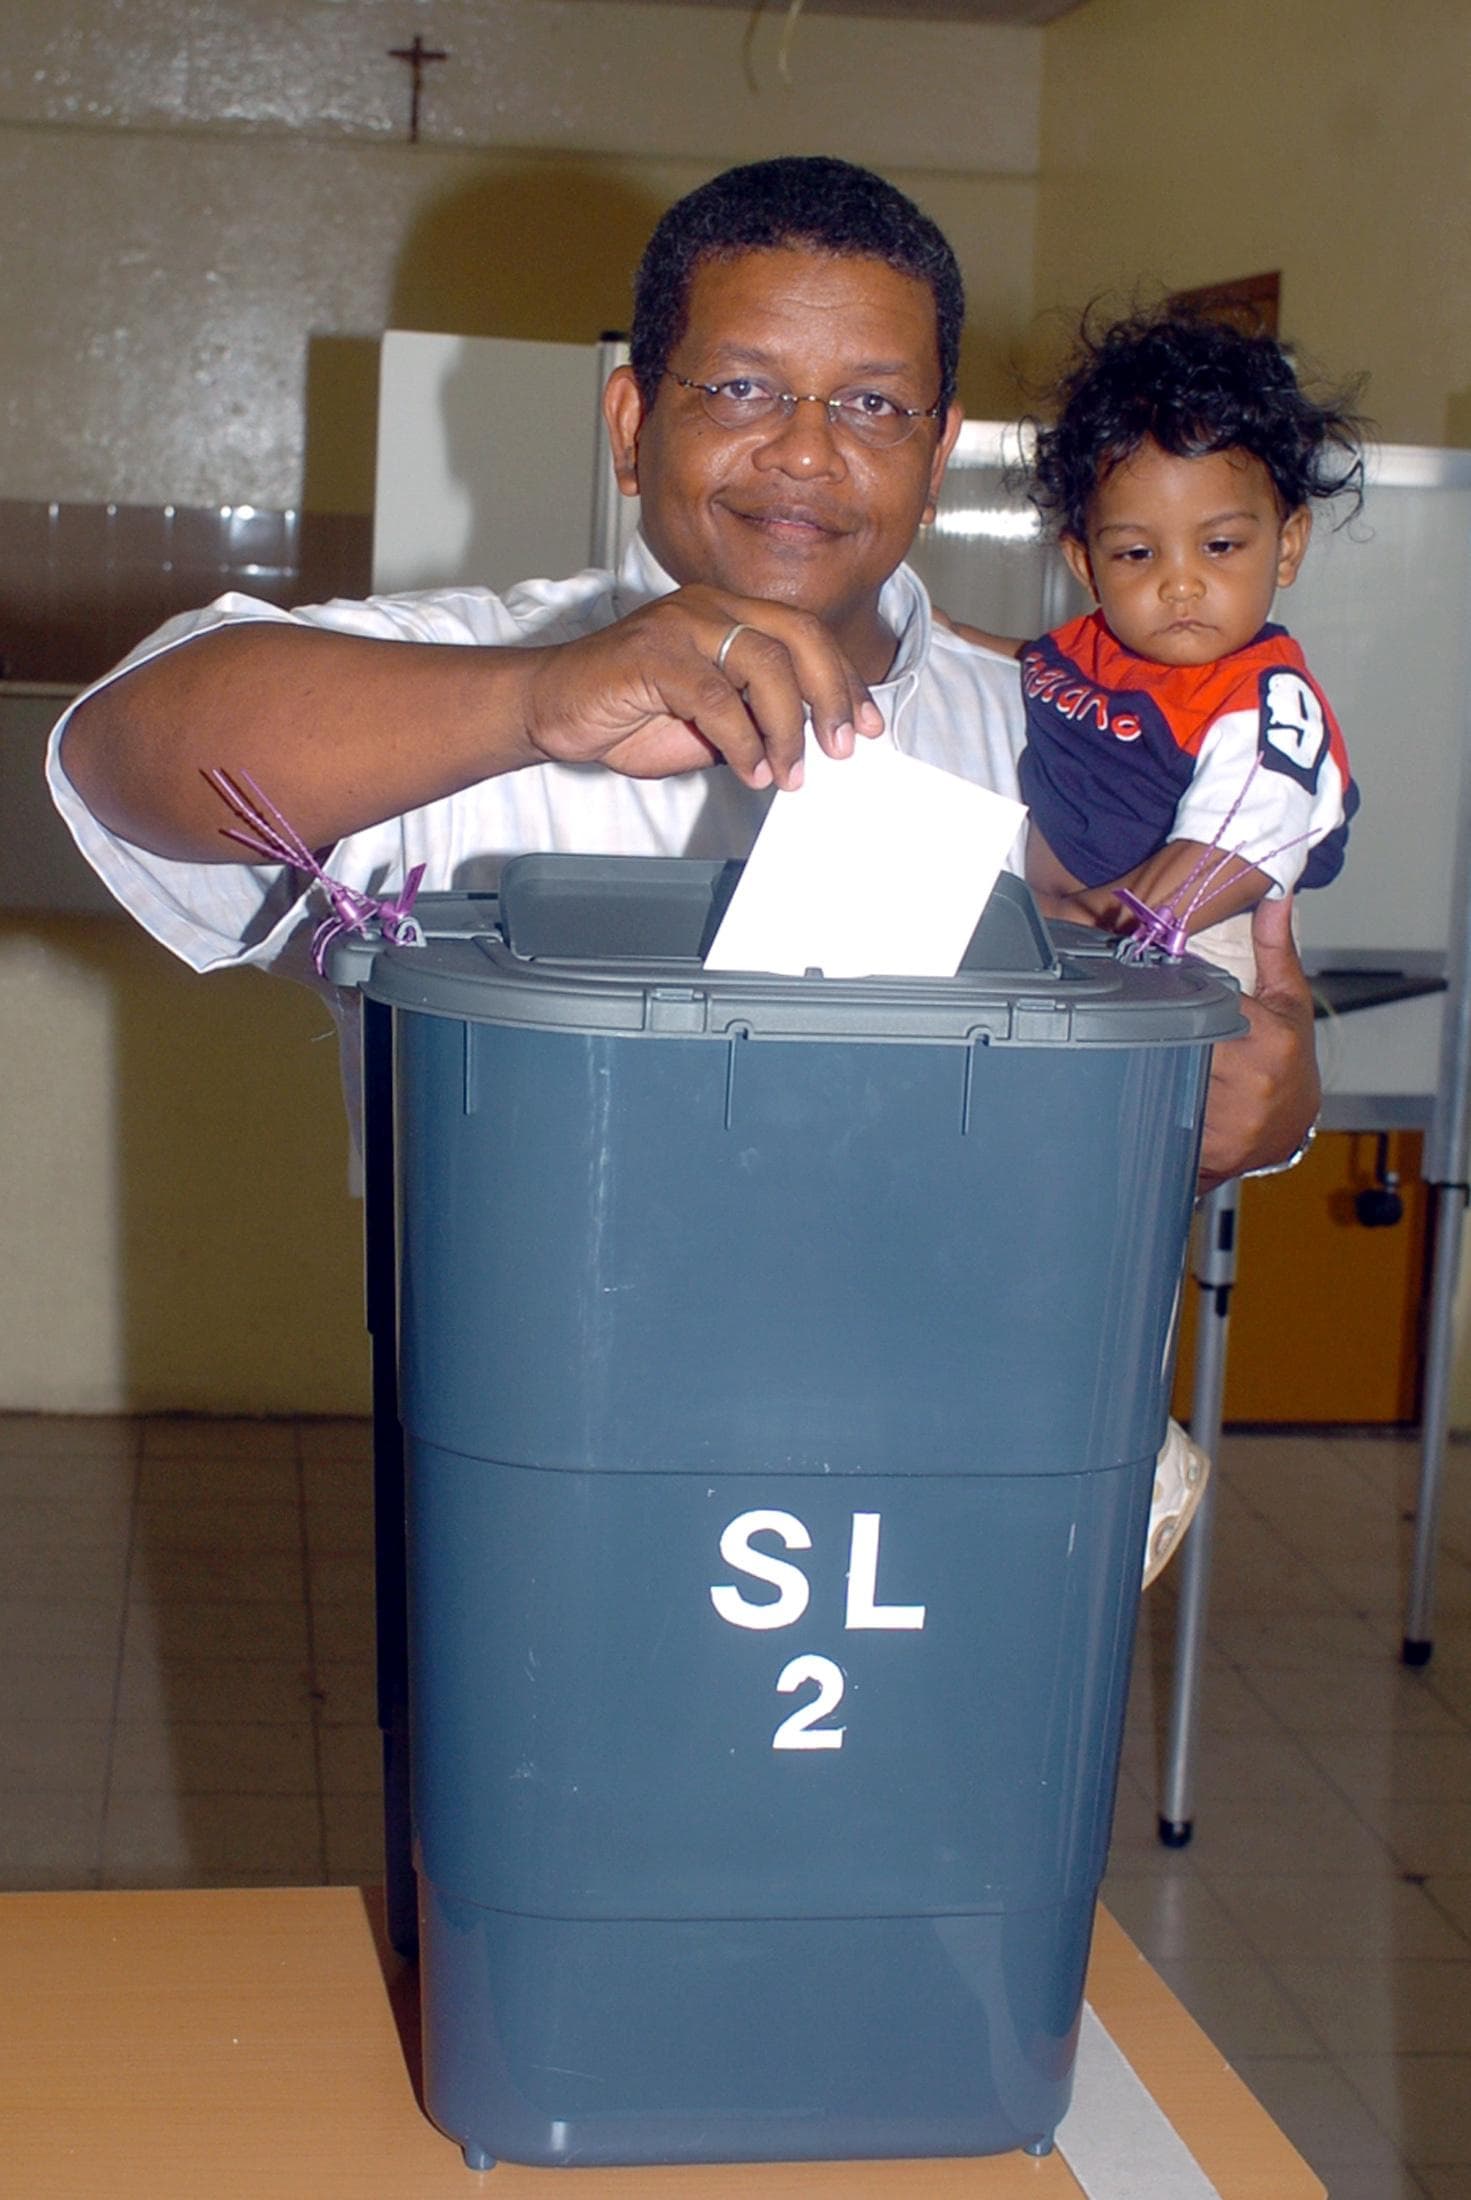 Seychelles opposition wins presidency for first time in 43 years